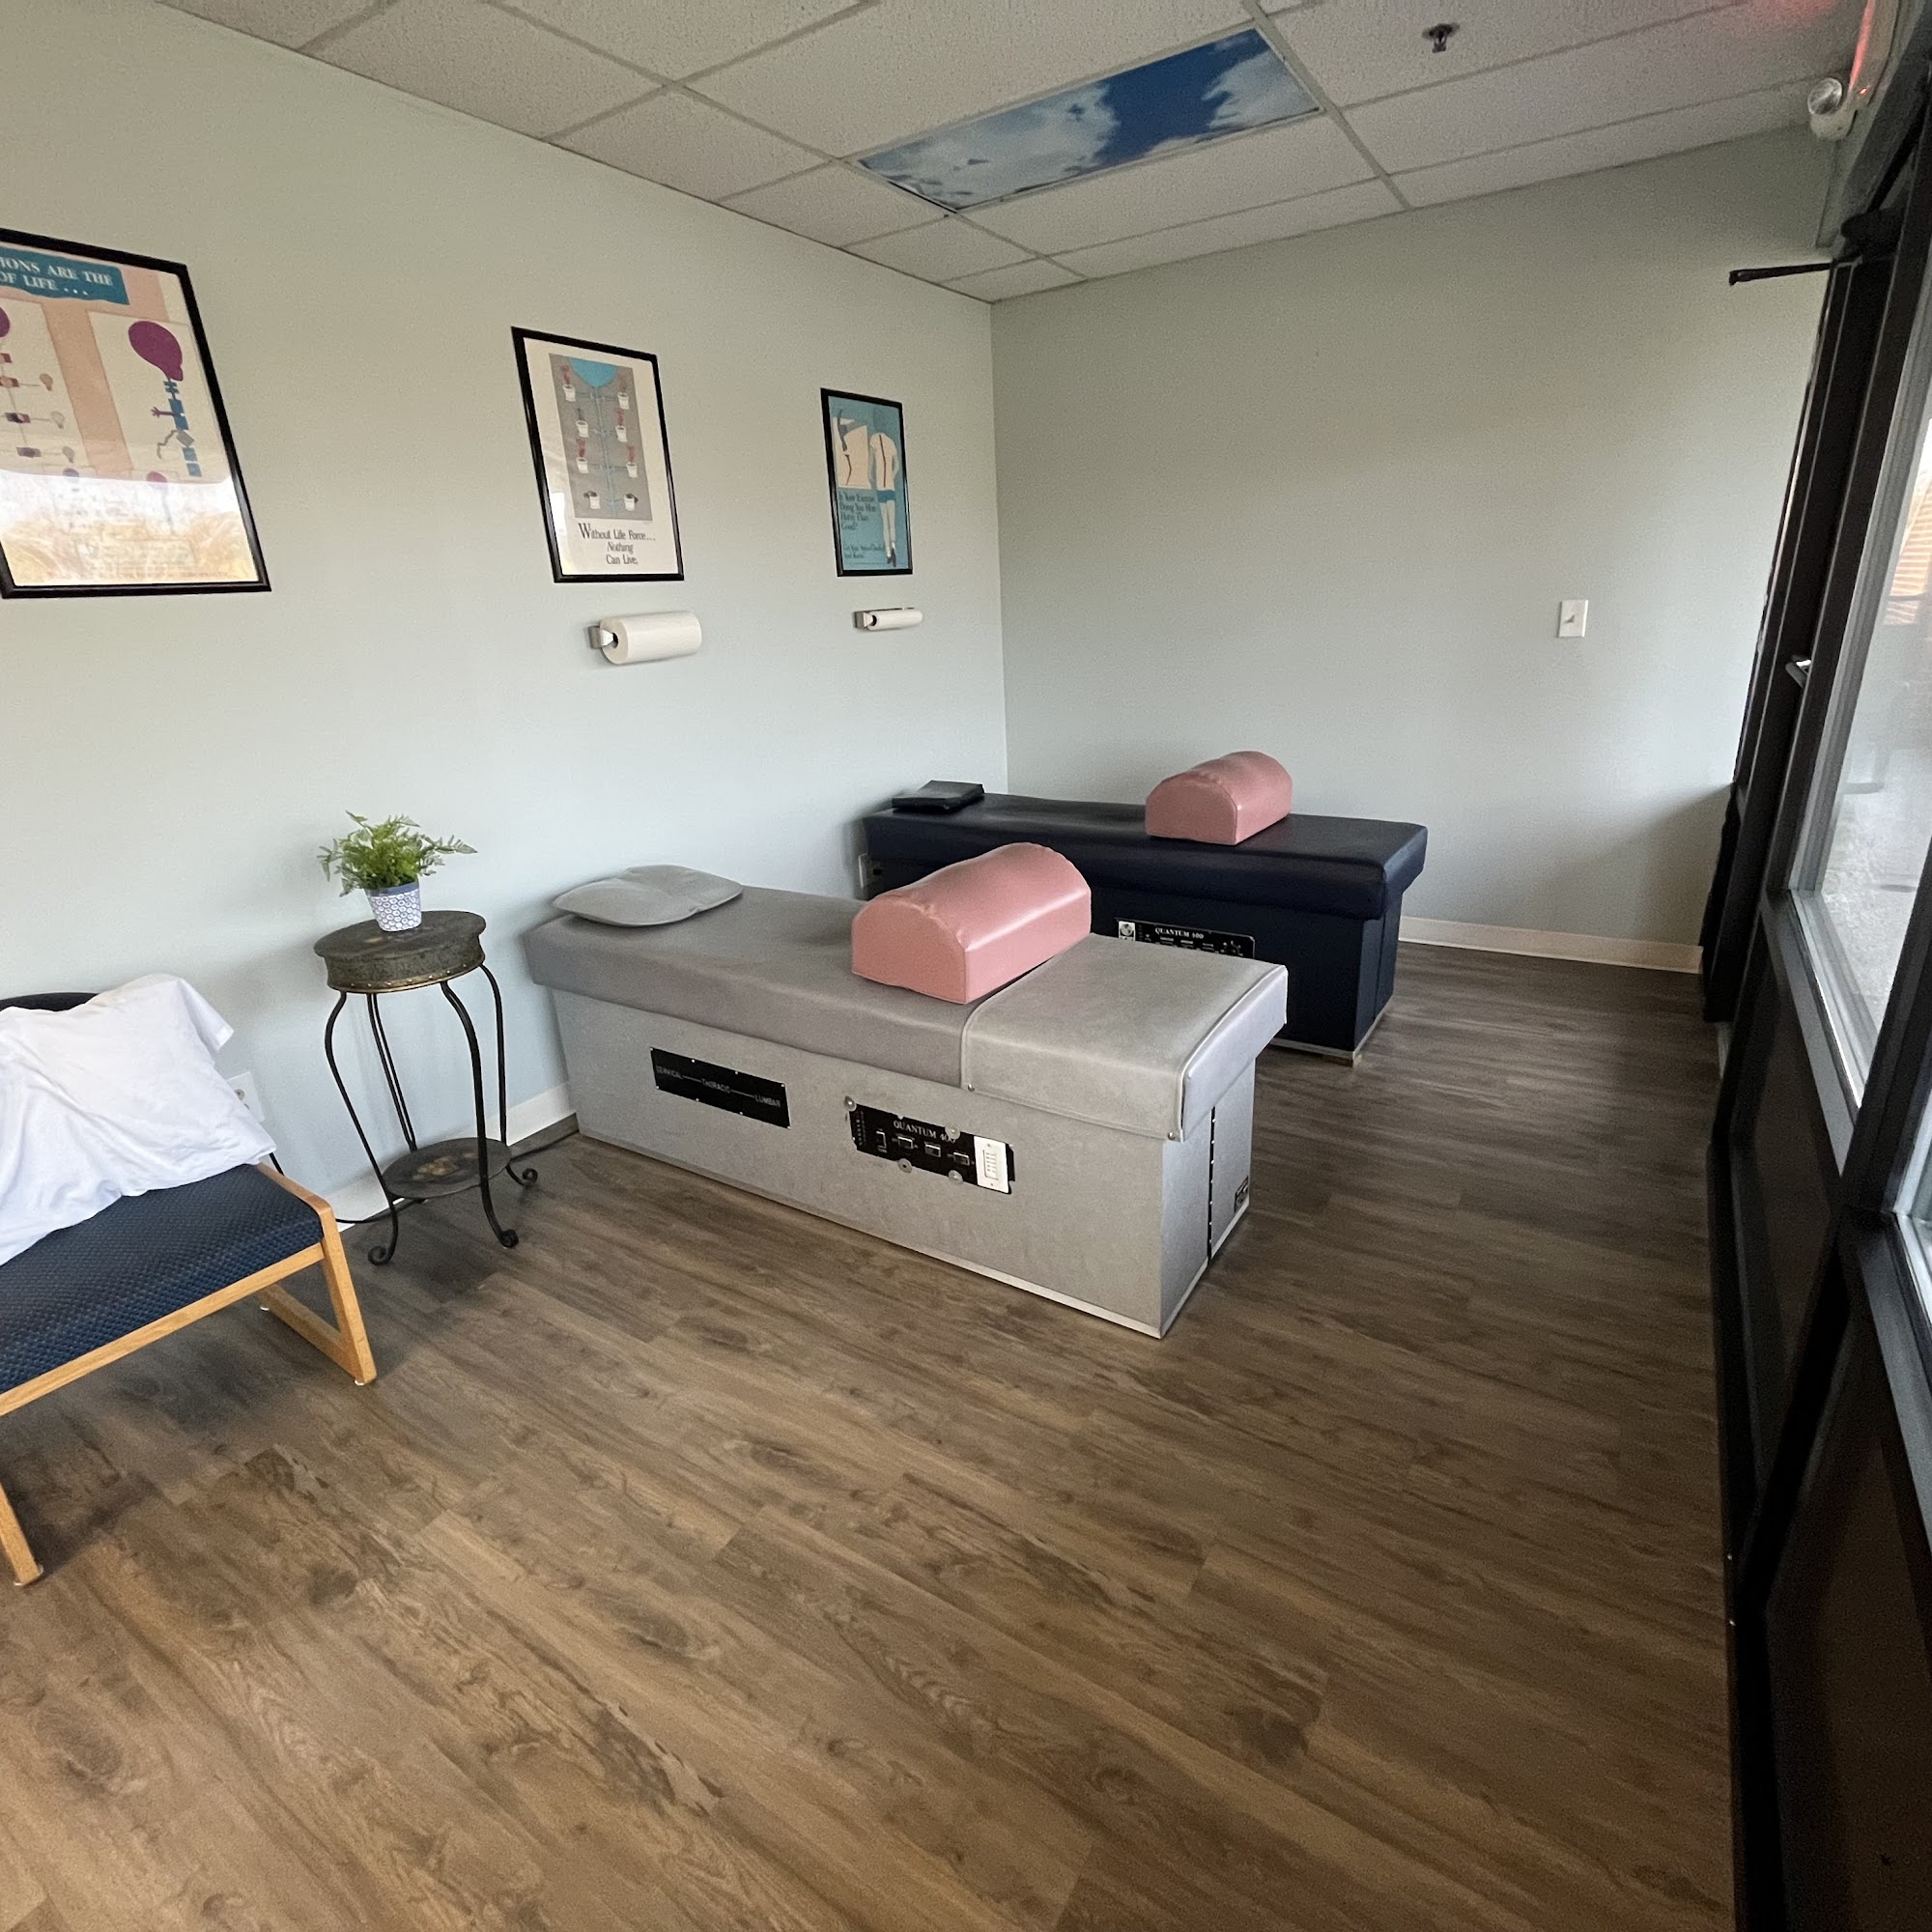 Bartlinski Chiropractic & Physical Therapy